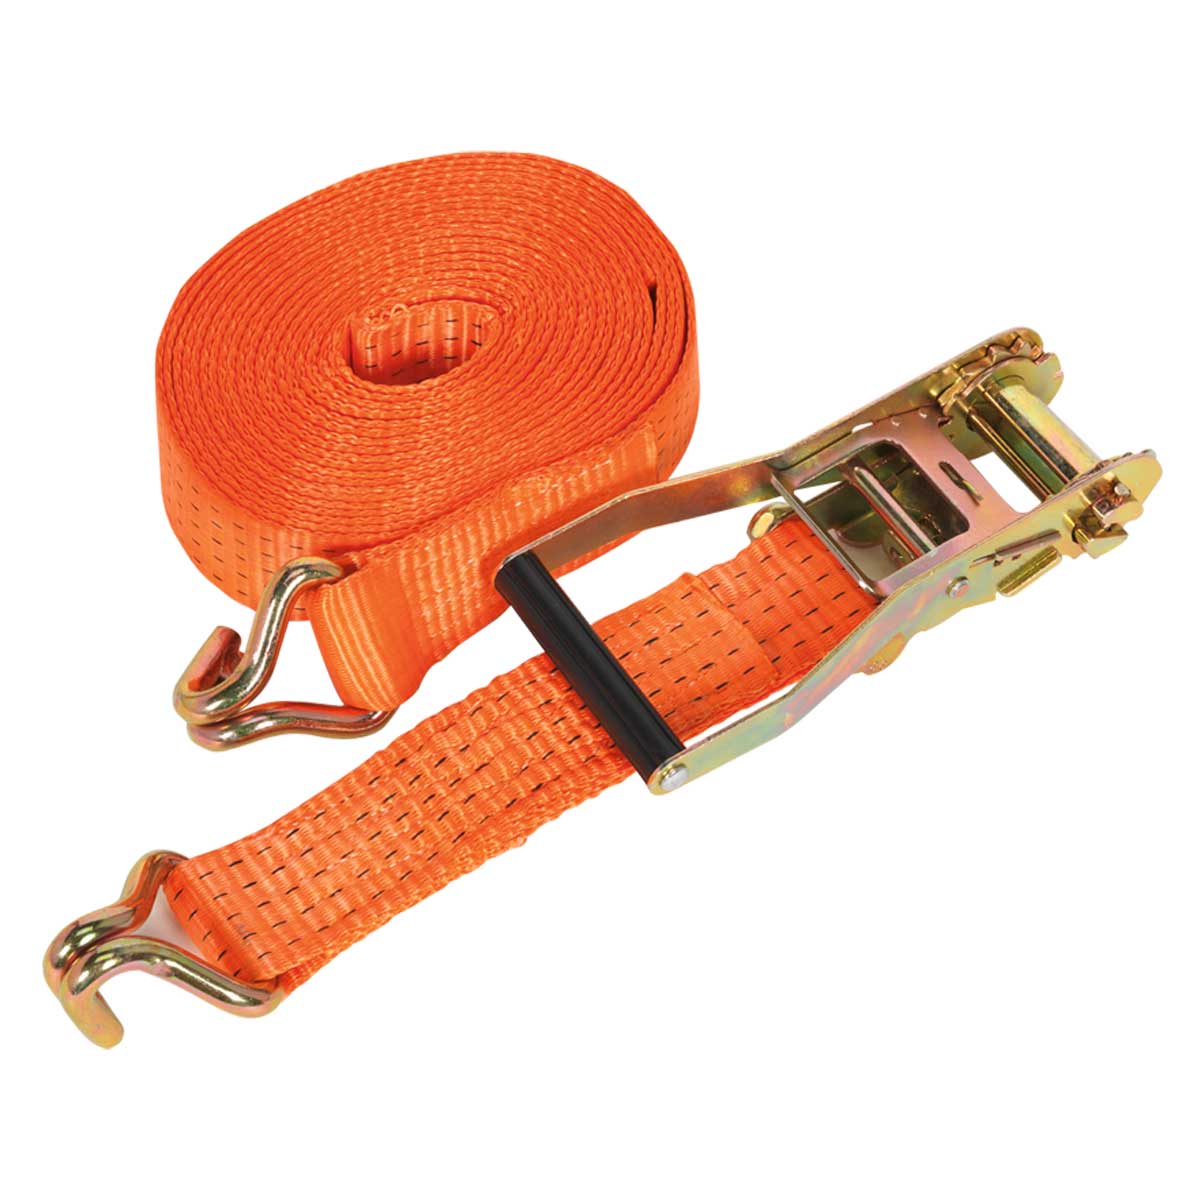 5 Tips to Choose the Ratchet Tie Down Straps